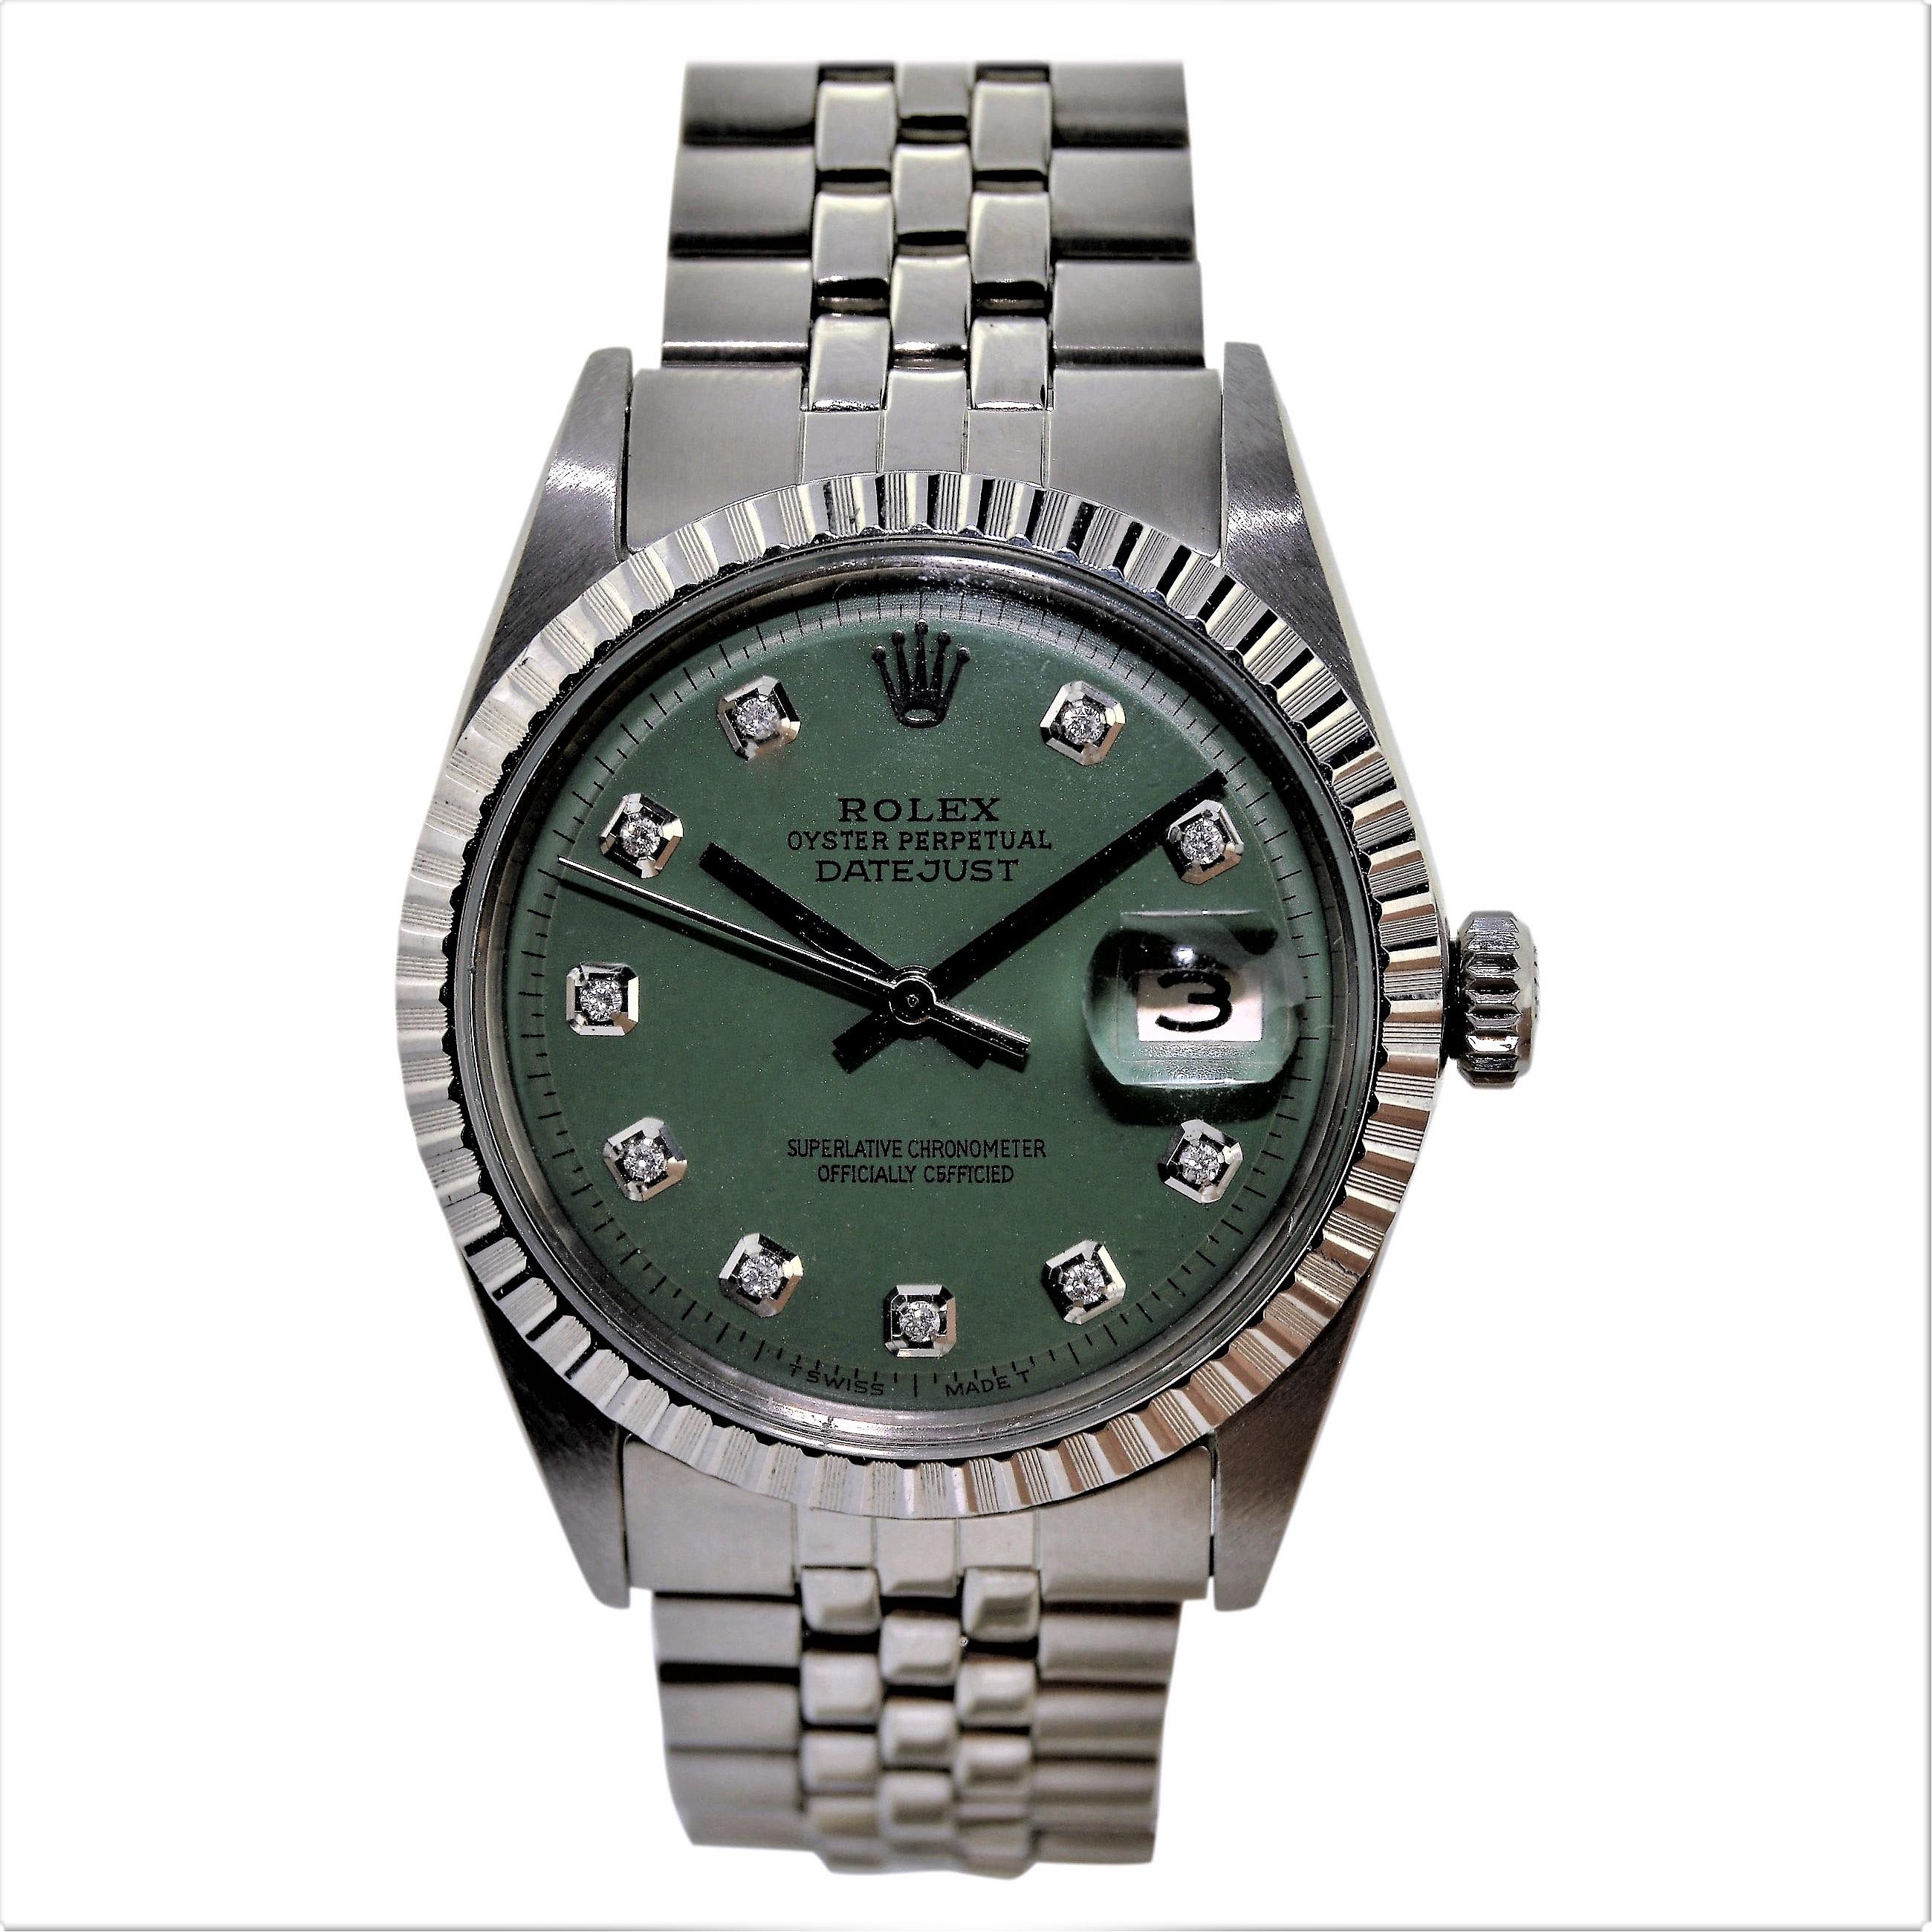 FACTORY / HOUSE: Rolex Watch  Company
STYLE / REFERENCE: Datejust / 1601
METAL: Stainless Steel 
CIRCA: Late 1970'S
MOVEMENT / CALIBER: Perpetual, Automatic / 26 Jewels 1570
DIAL / HANDS: Custom Replacement Diamond Dial / Baton Hands
DIMENSIONS: